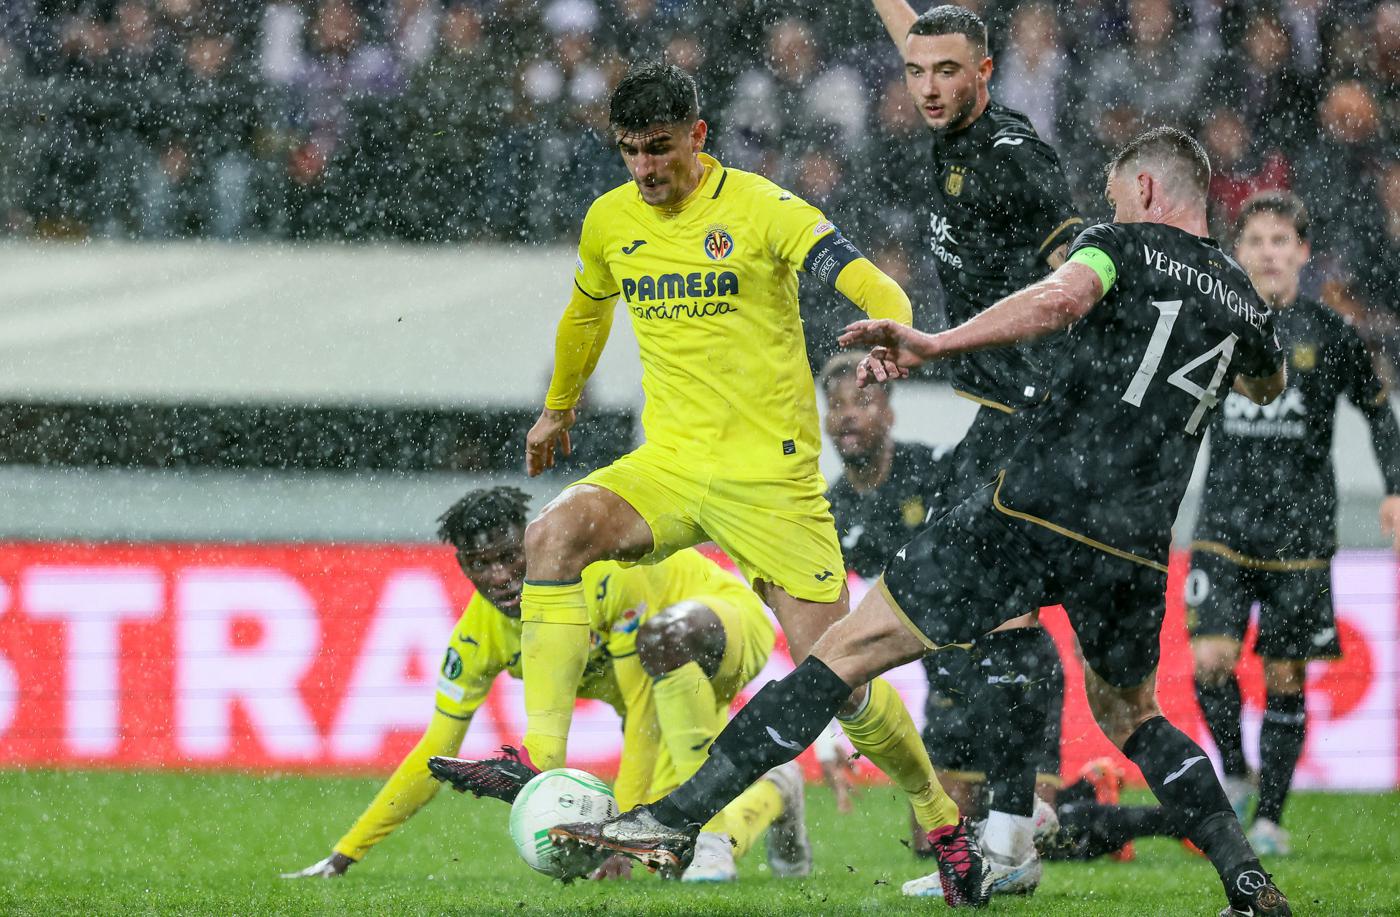 Anderlecht v Villarreal - 1:1. Conference League. Overview of the match, statistics.